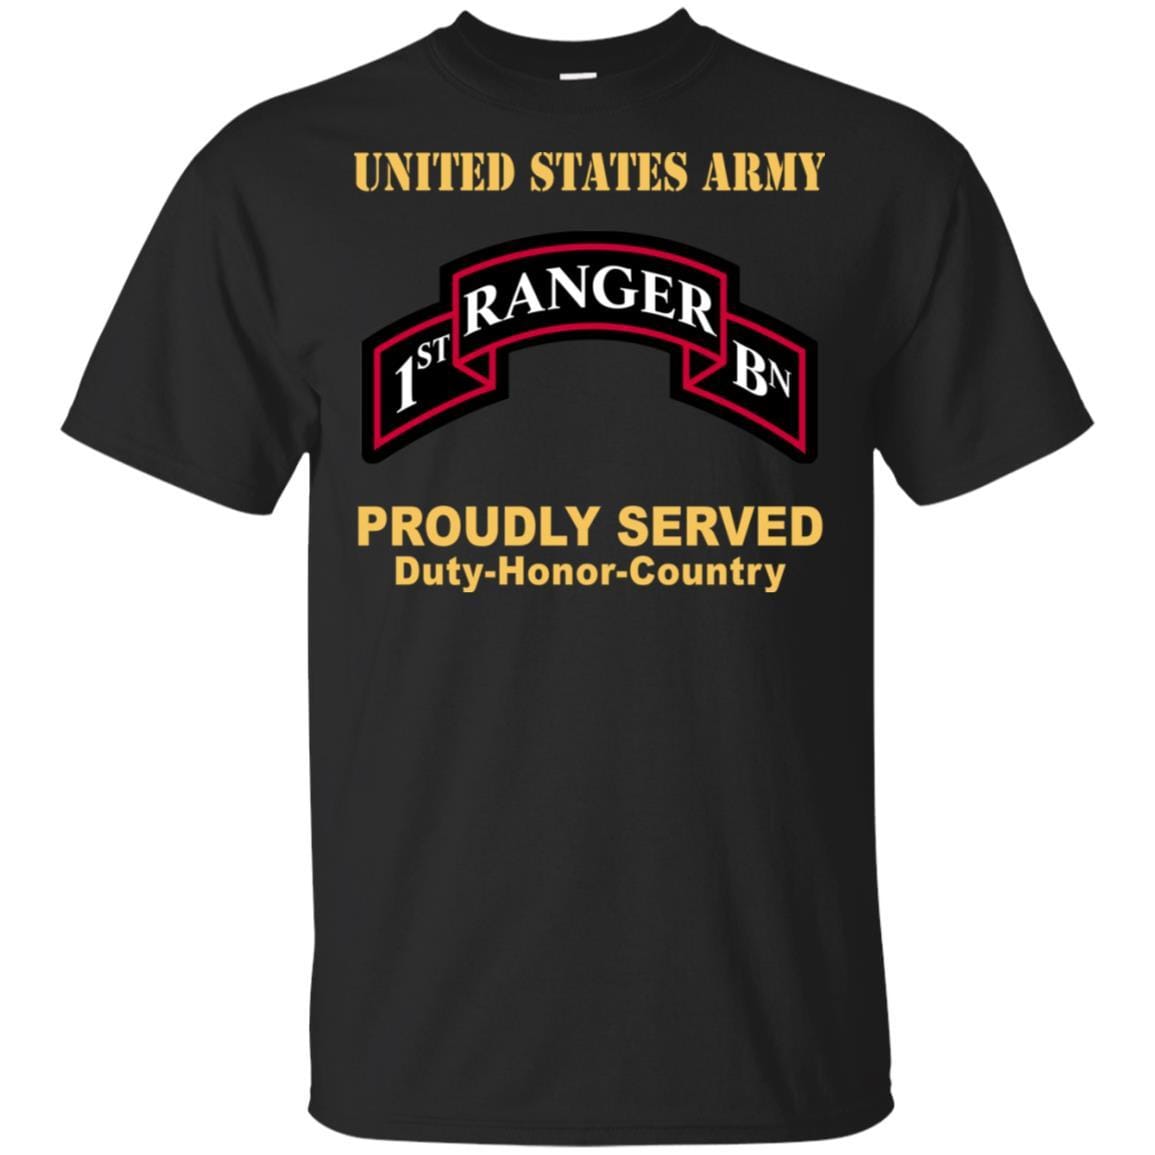 US ARMY 75 RANGER REGIMENT 1ST BATTALION - Proudly Served T-Shirt On Front For Men-TShirt-Army-Veterans Nation